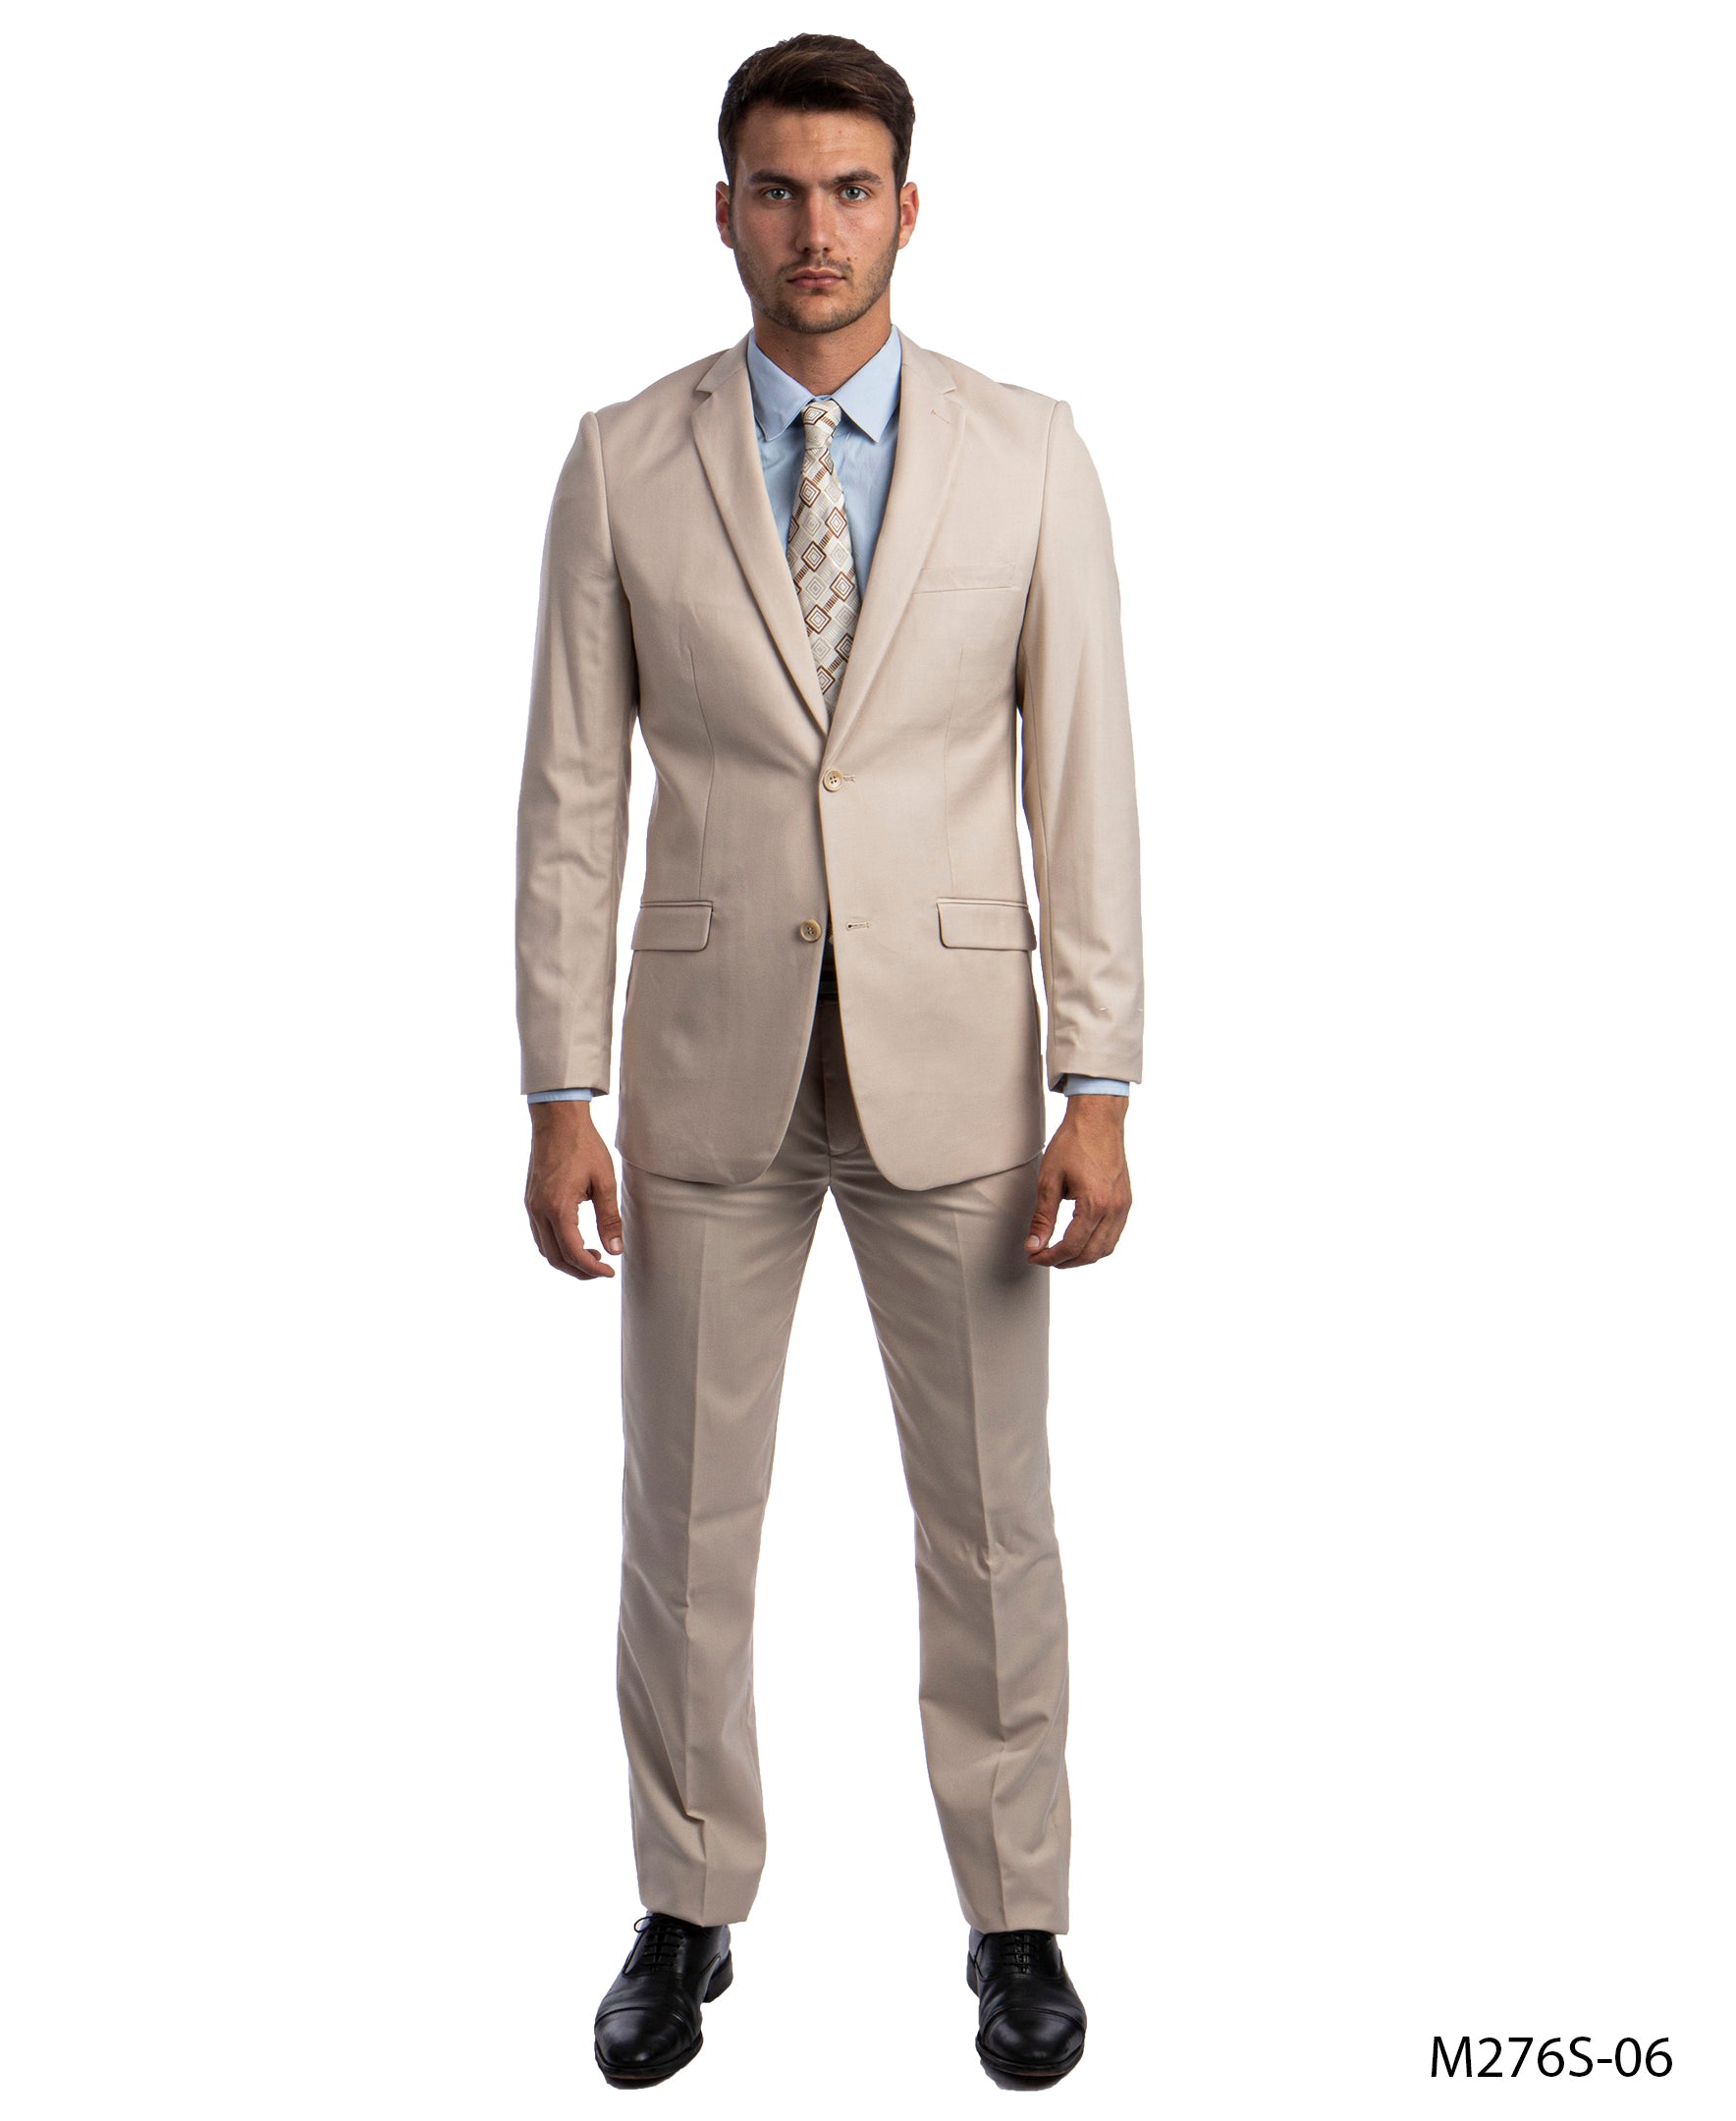 Tan Suit For Men Formal Suits For All Ocassions